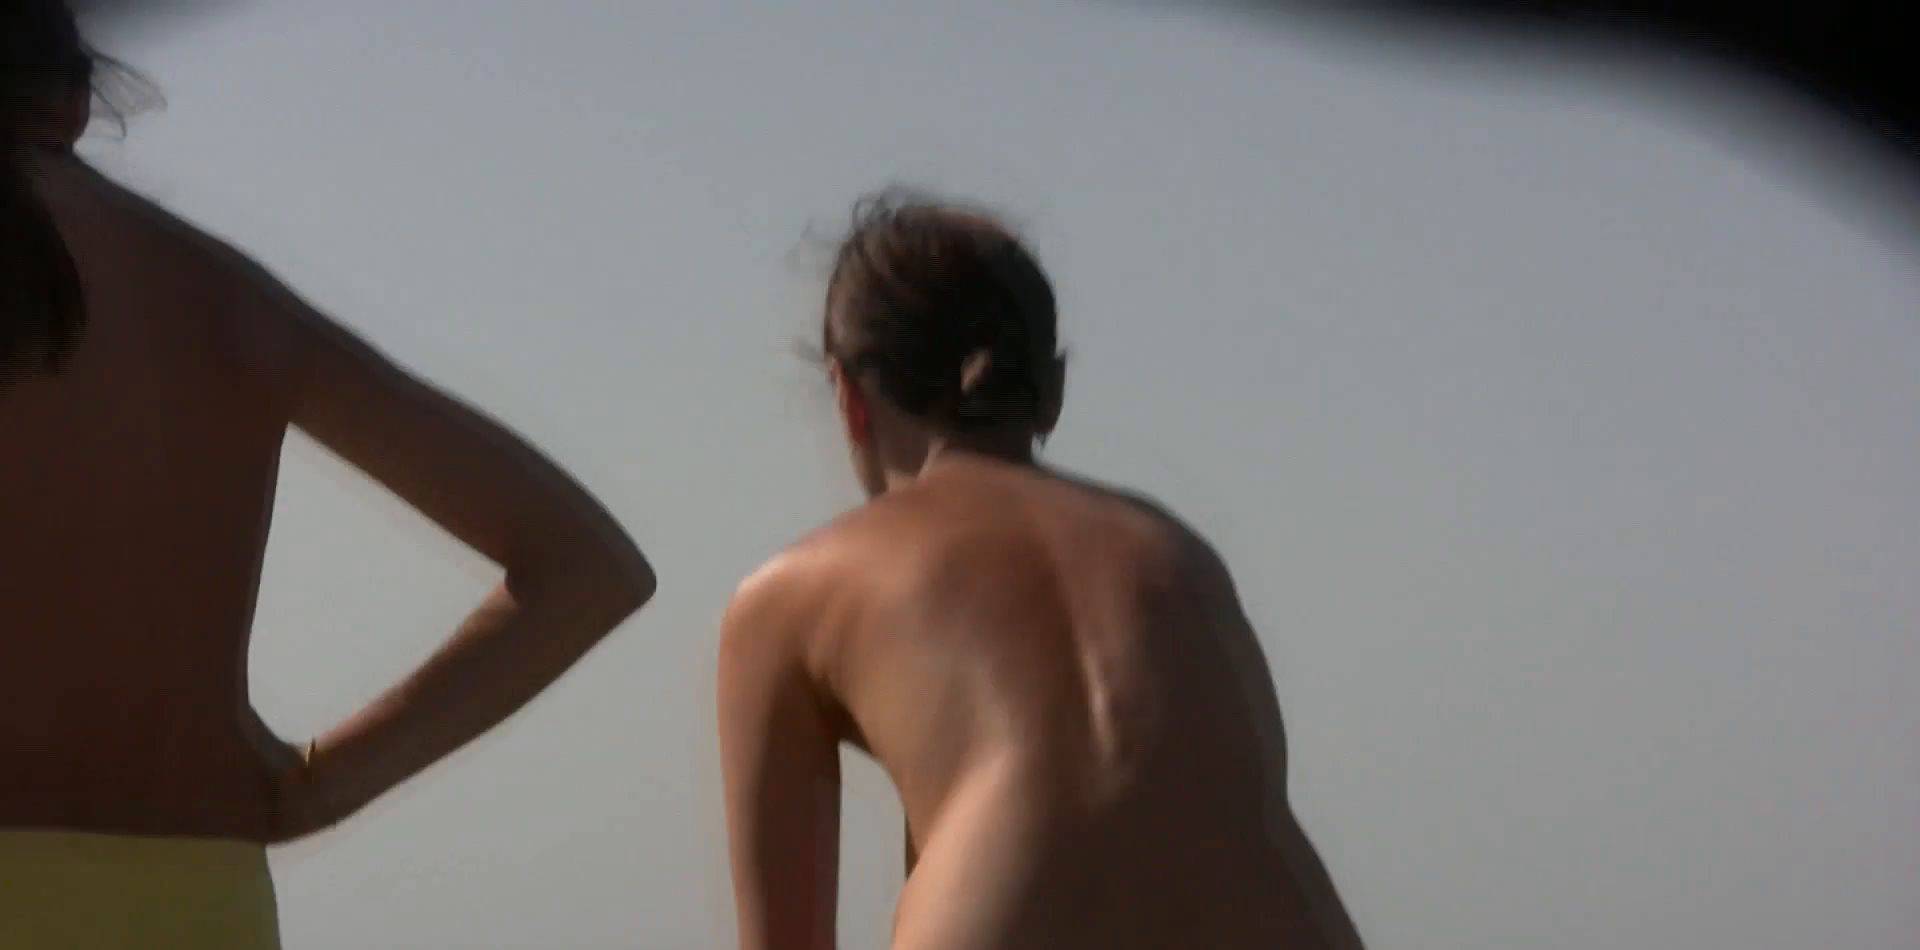 Candid-HD-Candid Family Nudism 2 - 3